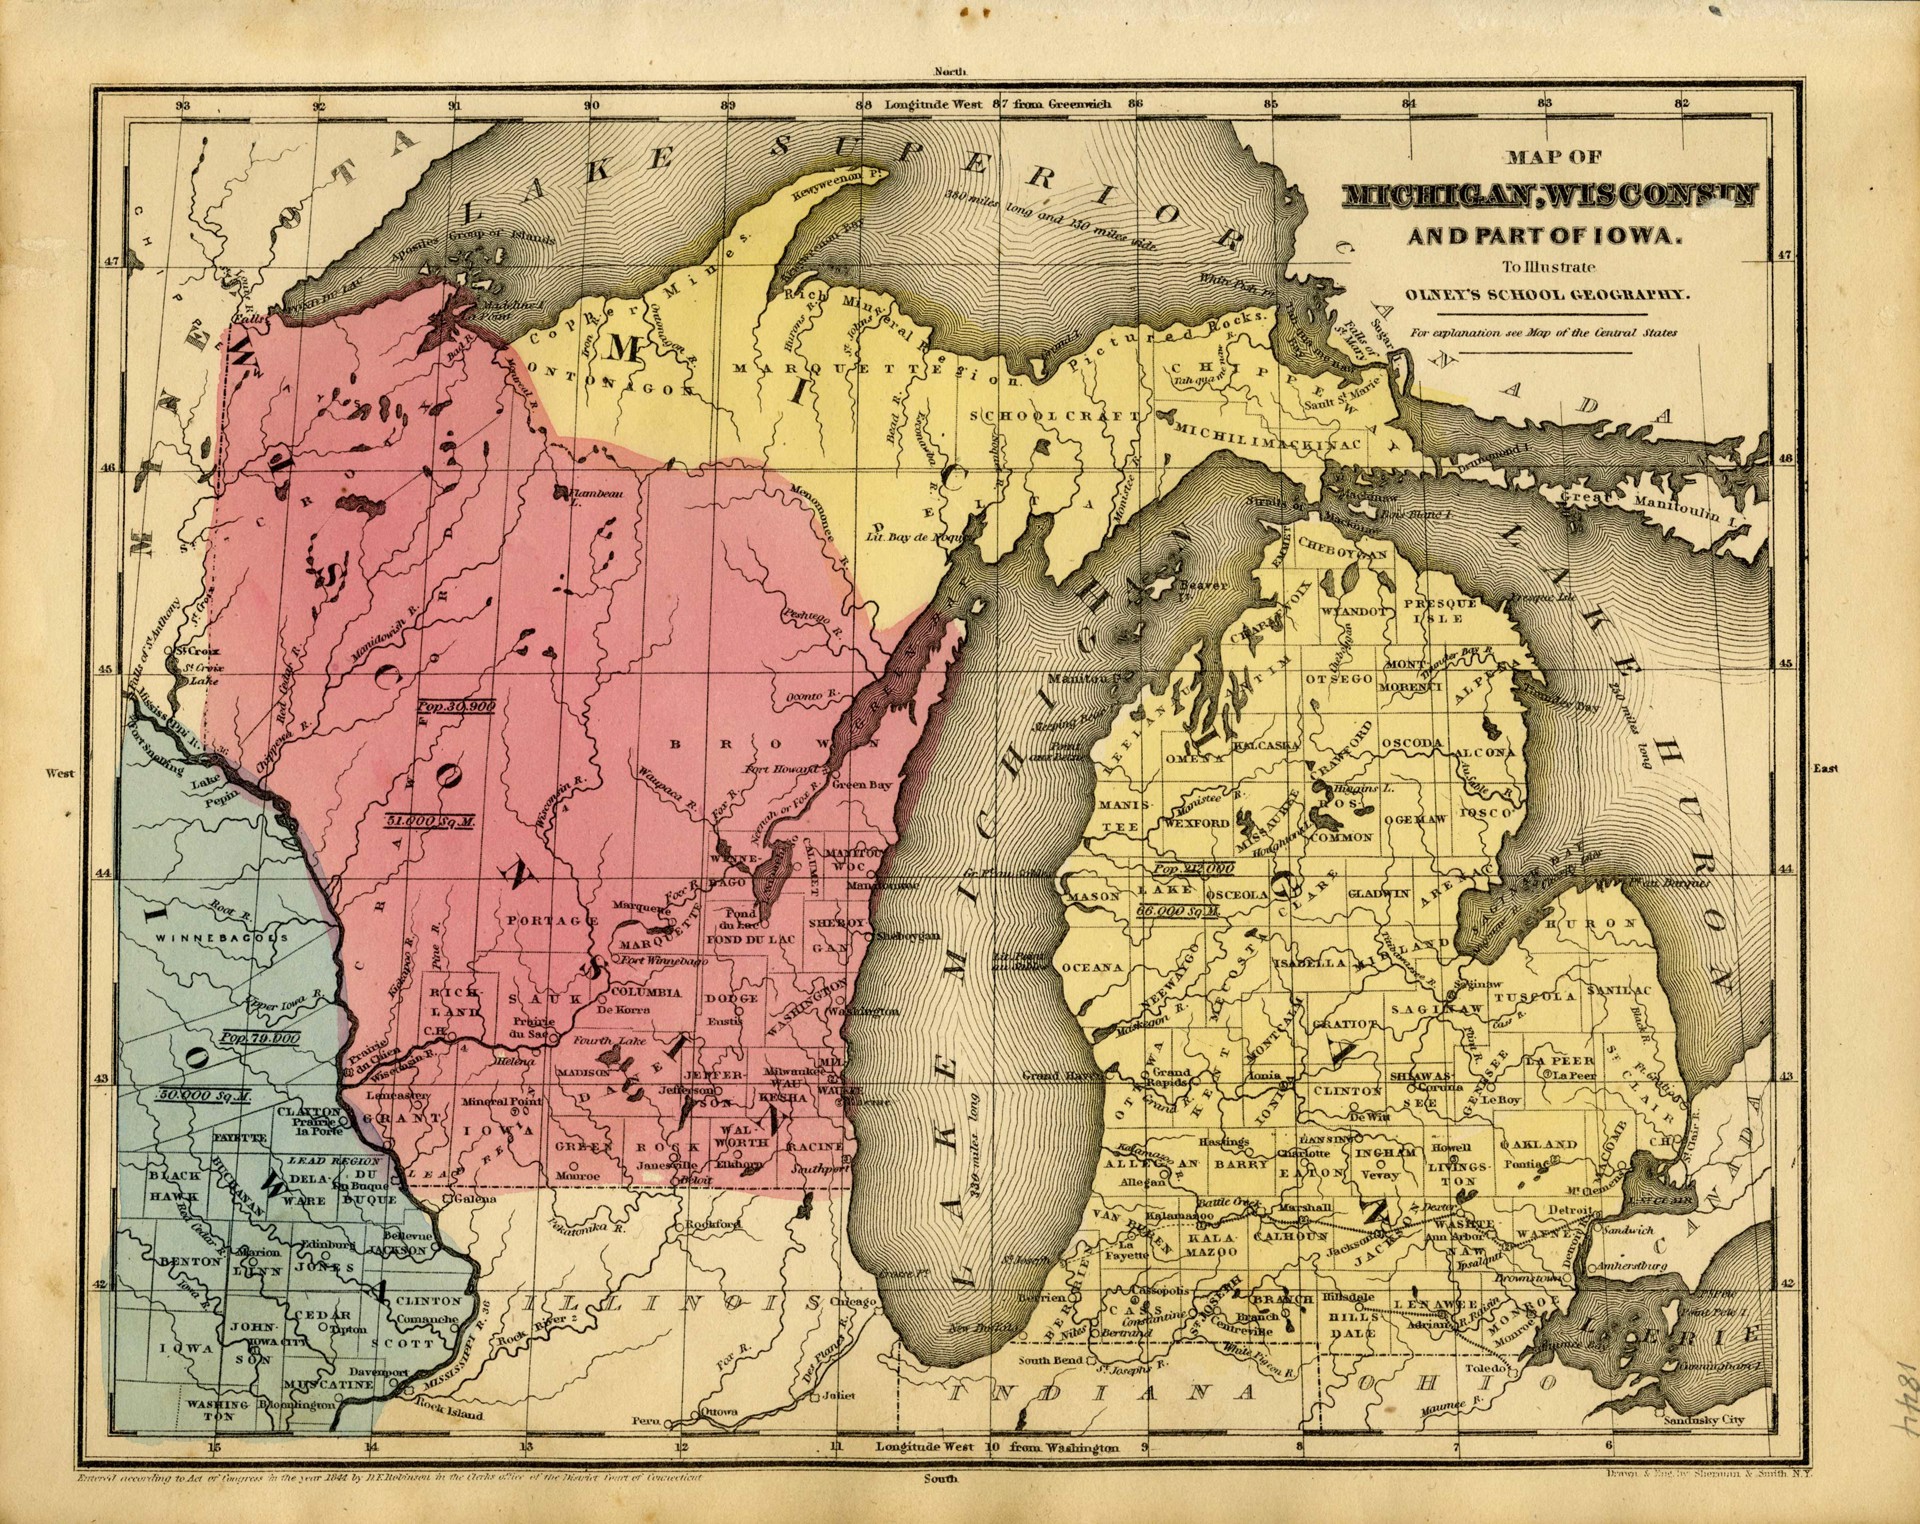 Map of Michigan, Wisconsin & Part of Iowa by Unknown